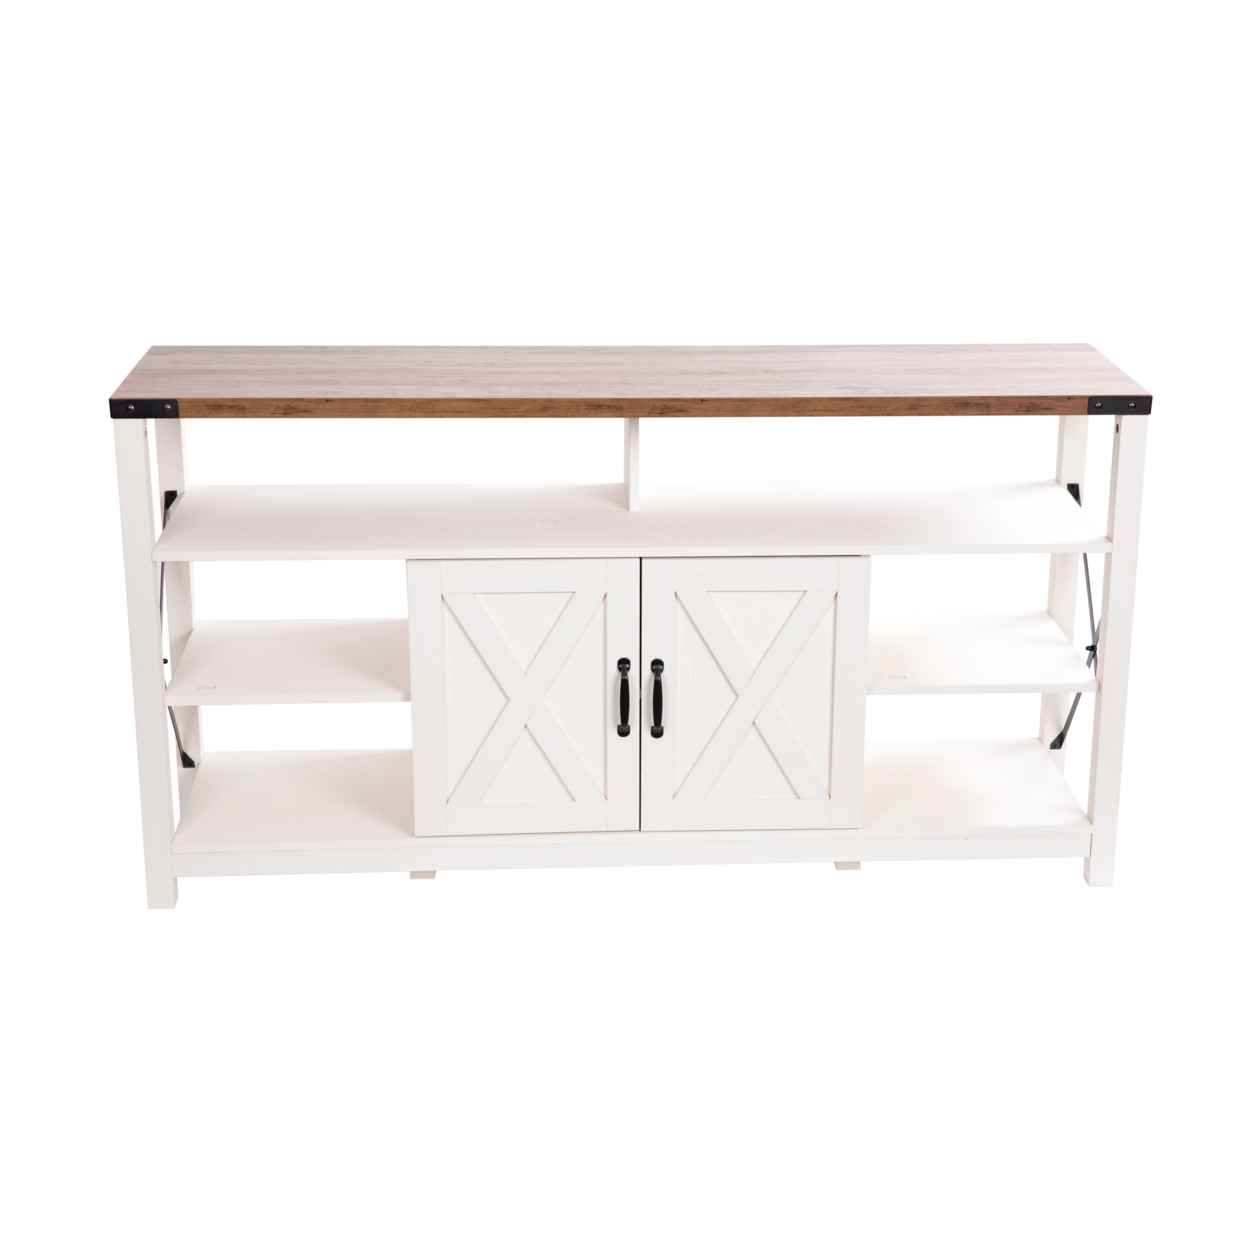 6 Inch White Rustic TV Stand